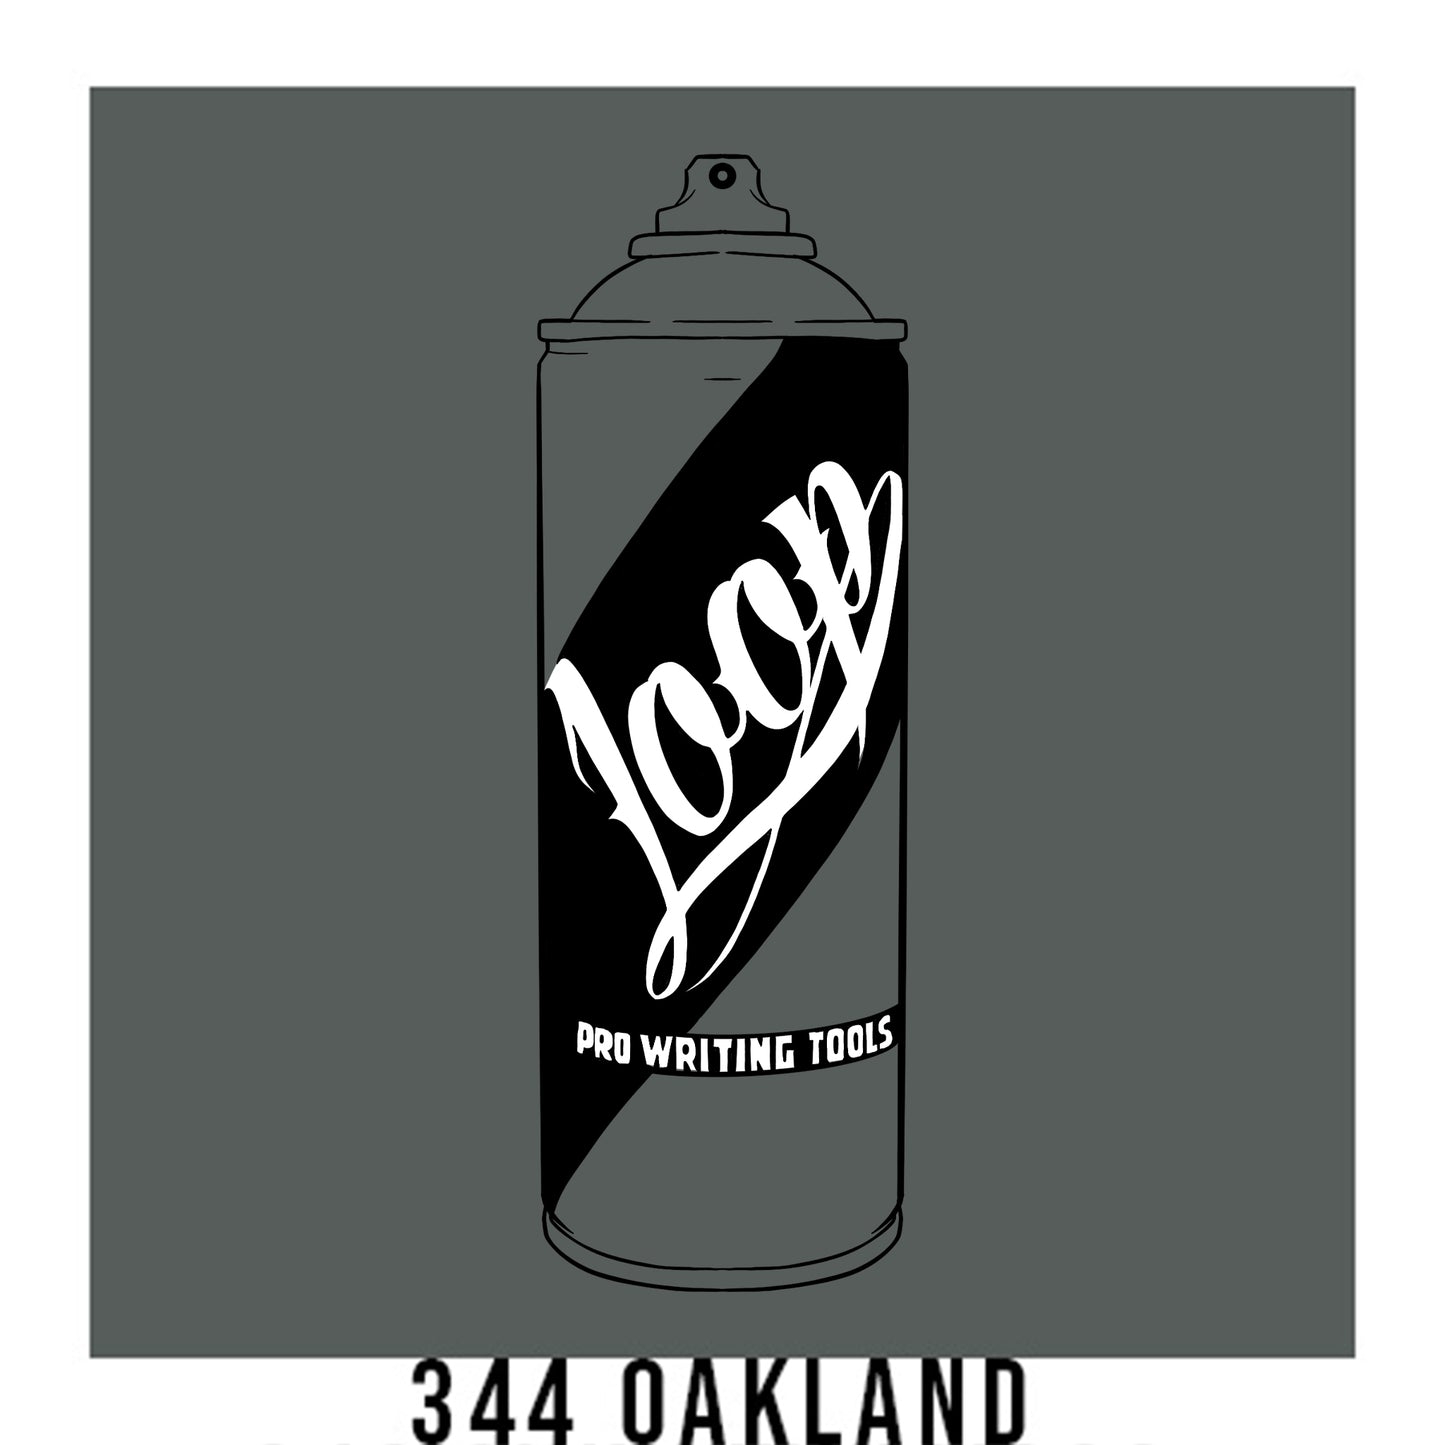 A black outline drawing of a grey spray paint can with the word "Loop" written on the face in script. The background is a color swatch of the same grey with a white border with the words "344 oakland" at the bottom.